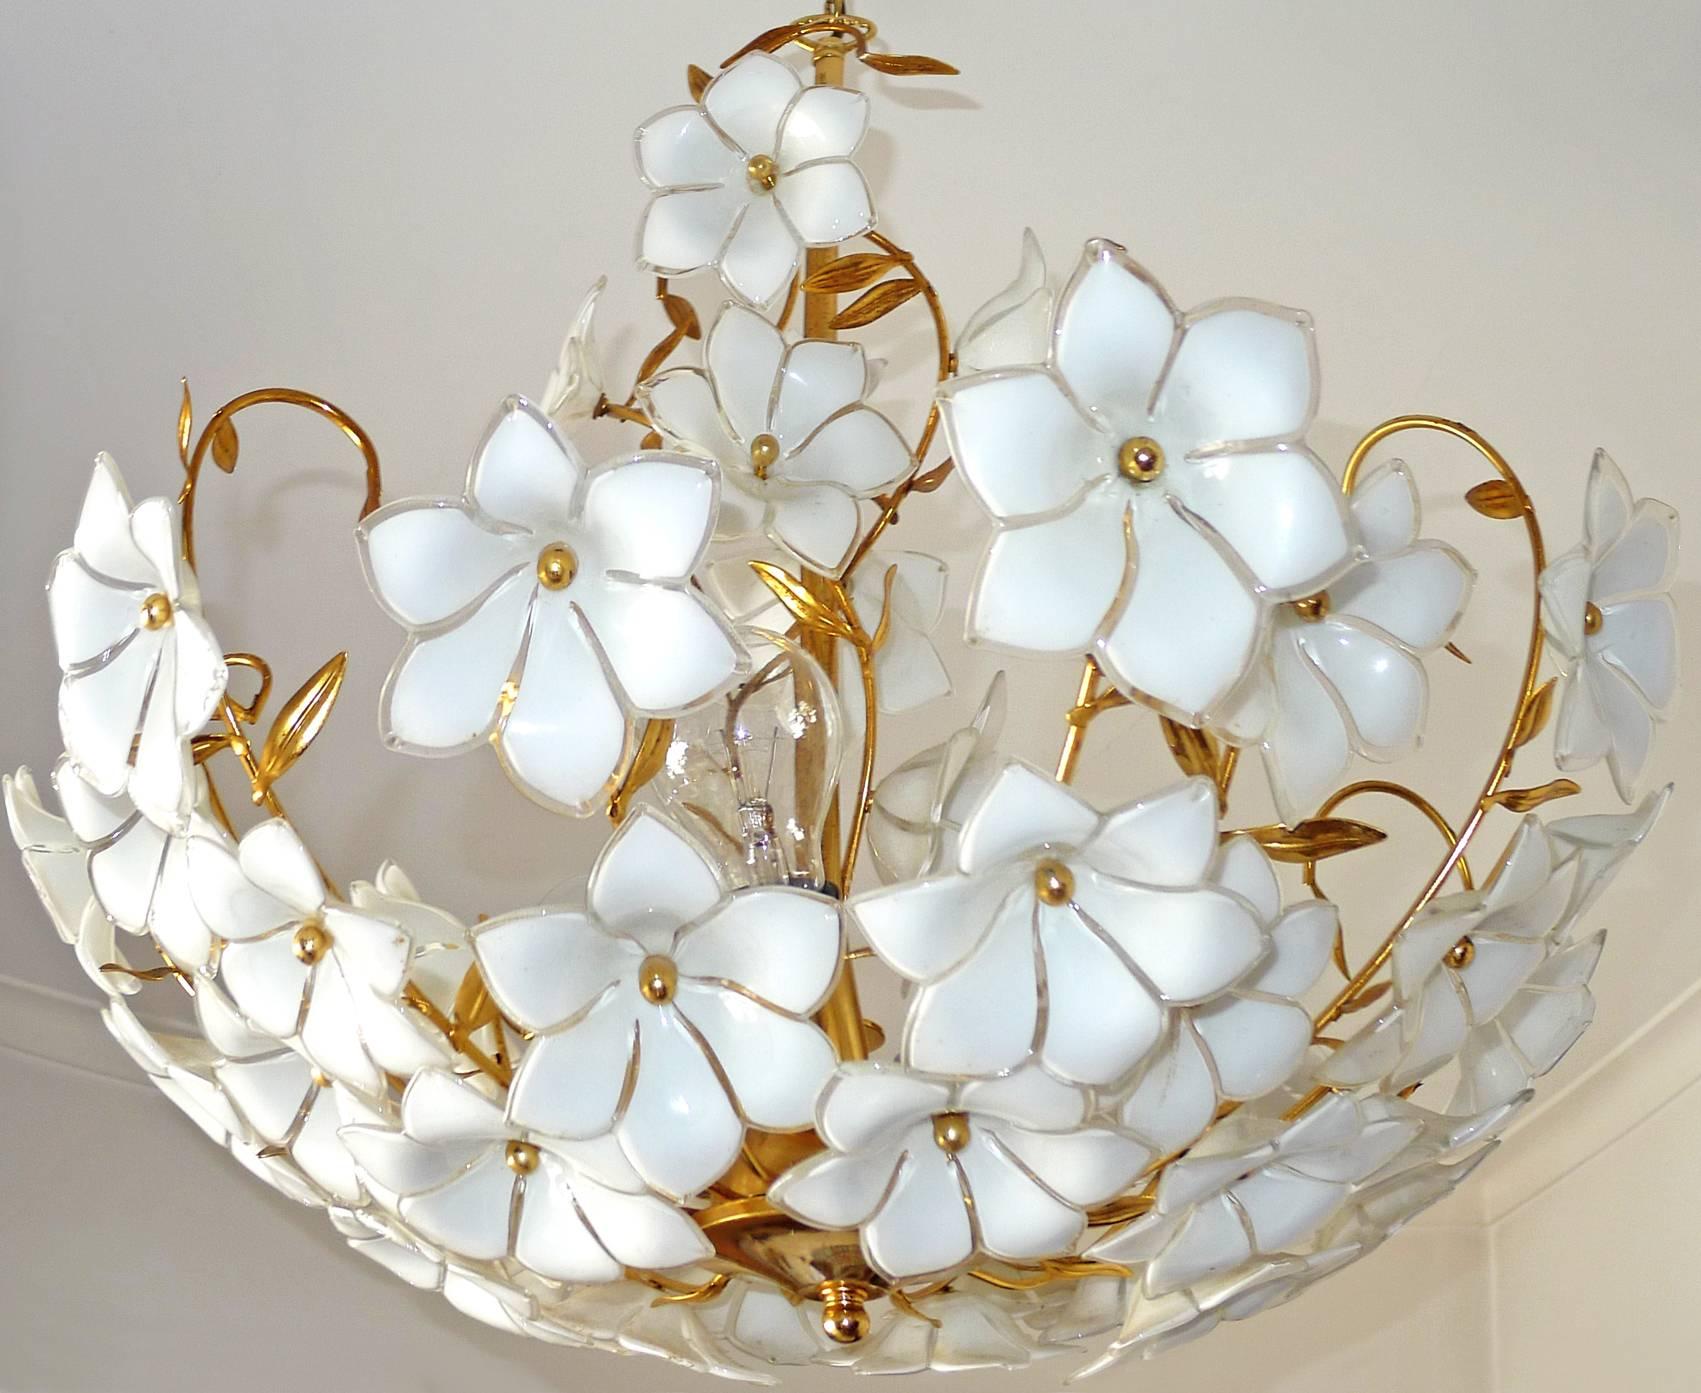 Large 1970s vintage midcentury Italian Murano flower bouquet after Venini art-glass with 43 handblown white and clear glass flowers and gold-plated brass. A few missing leaves,
Measures:
Diameter 24 in/ 60 cm
Height 28 in/ 70 cm
Weight: 17 lb/8